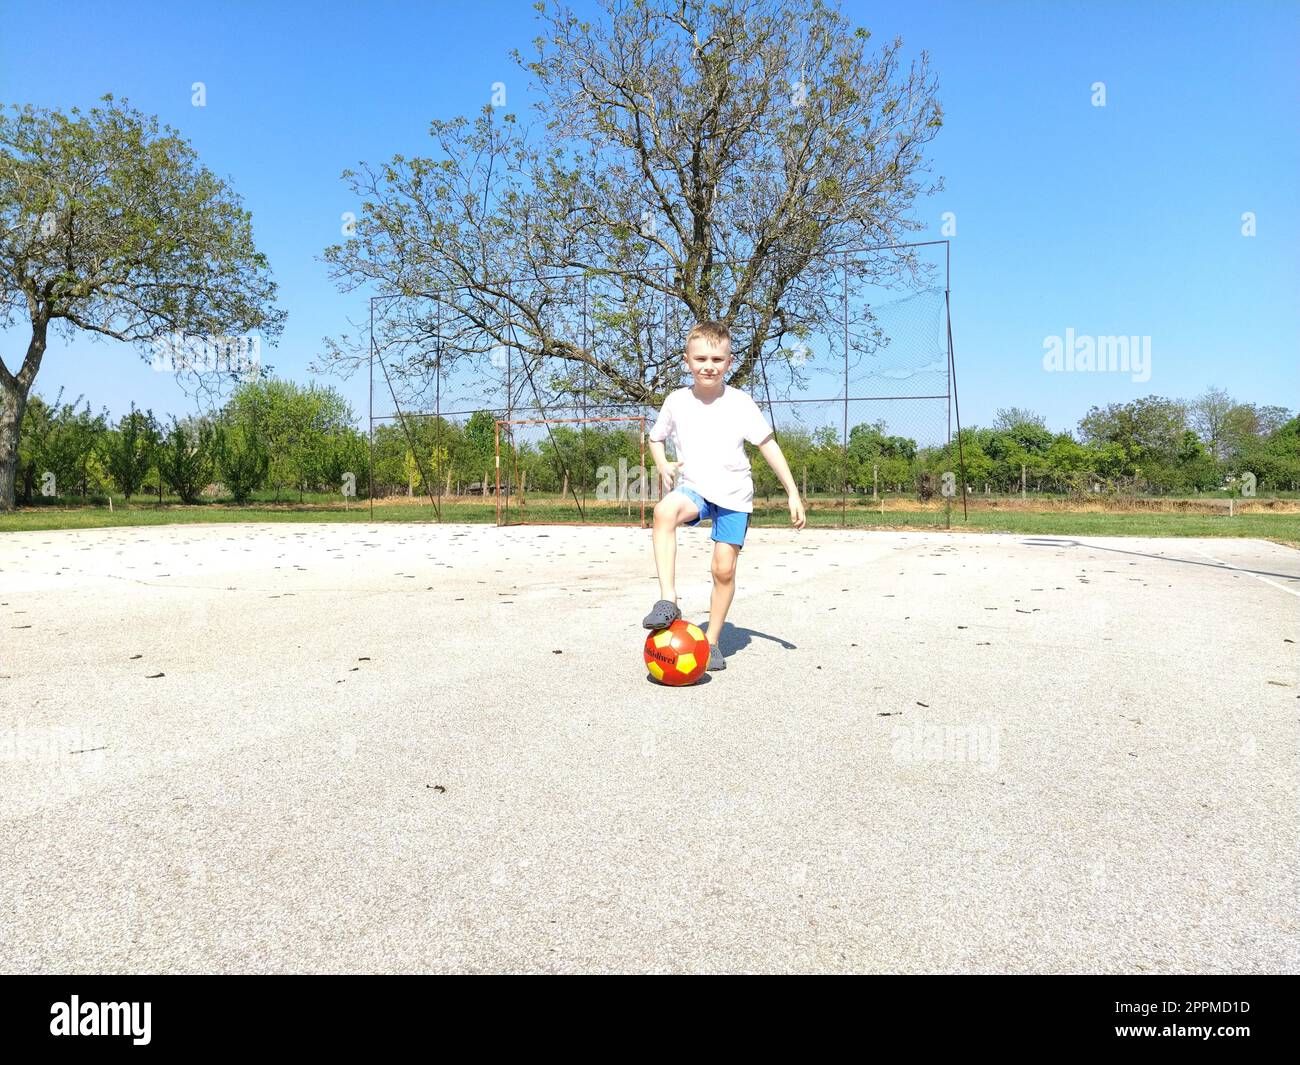 Sremska Mitrovica, Serbia. June 6, 2020. A boy plays ball at the playground. Asphalt sports court. A child in a white t-shirt. Toddler with blond hair, 7 years old. Running, kicking and exercises Stock Photo